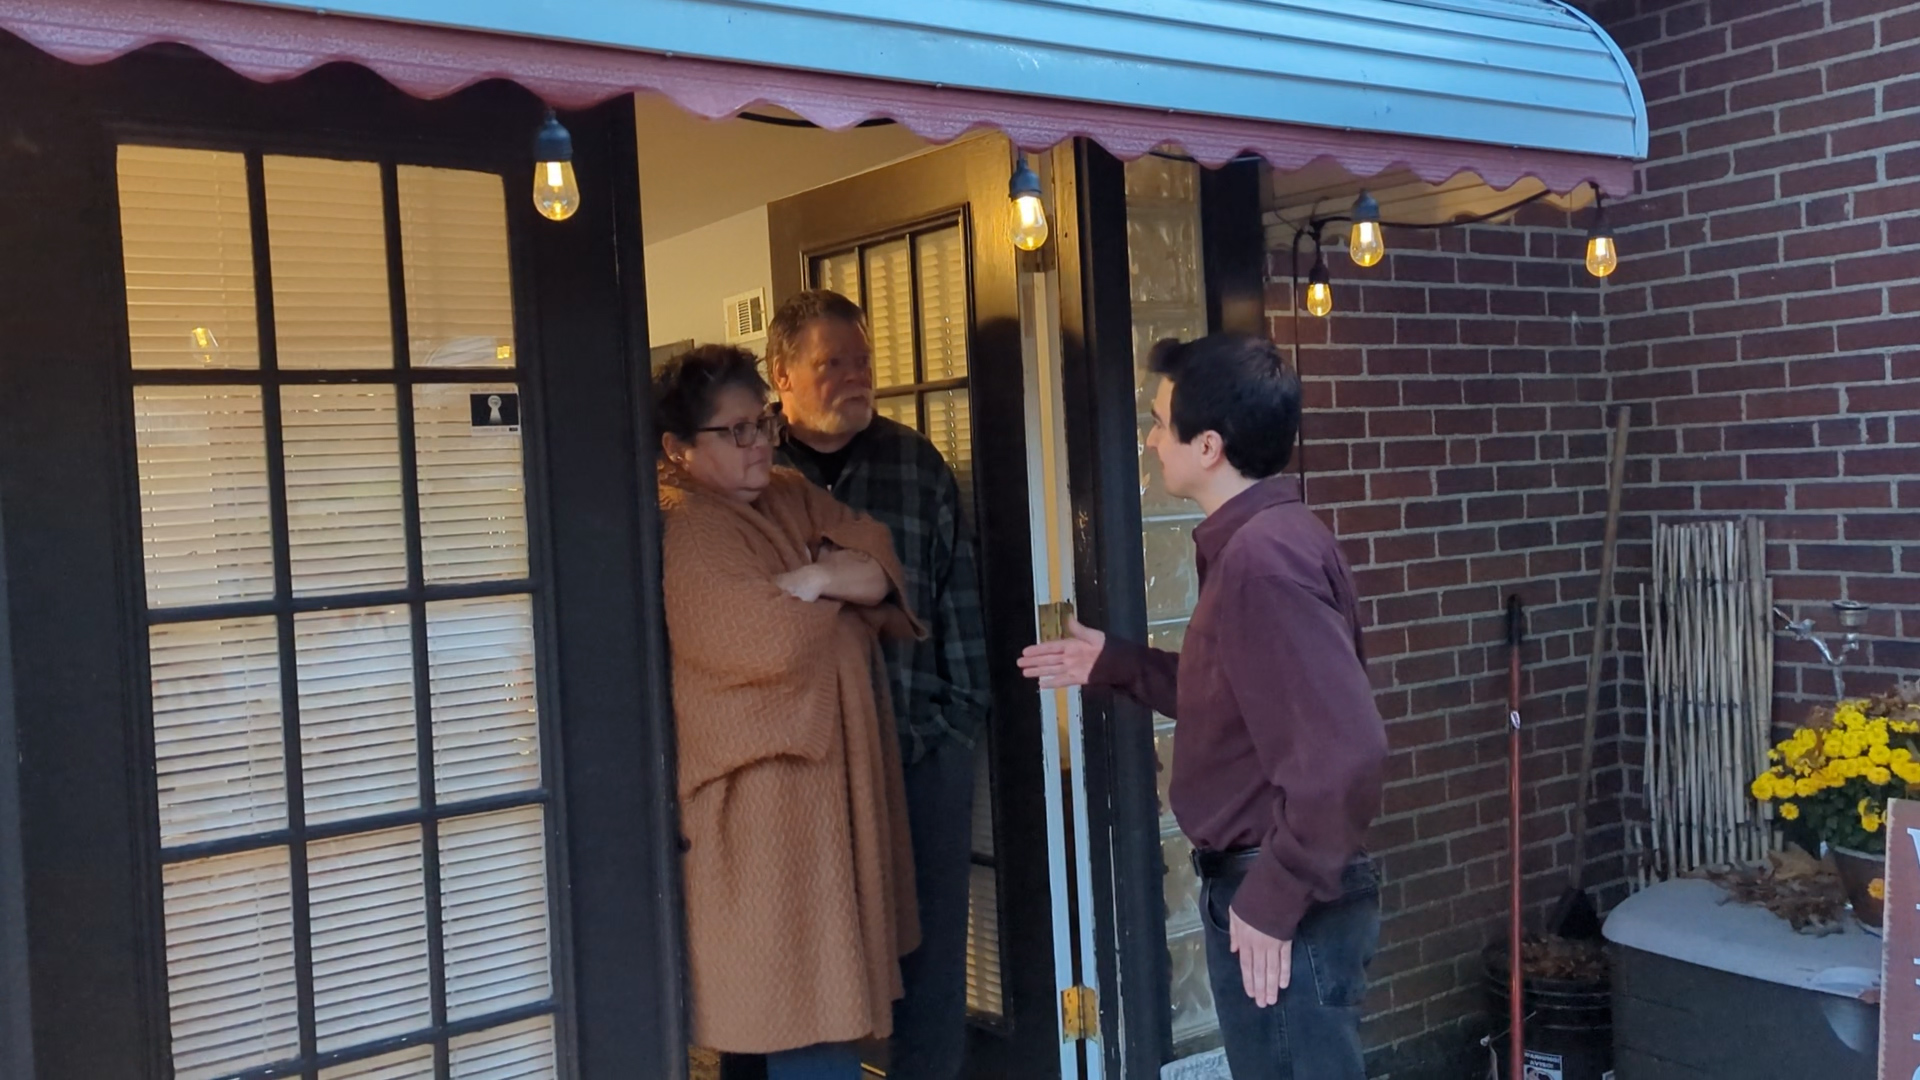 Candidate for State Representative, Nathan Jarosz, has discussion at a door of members of the community.